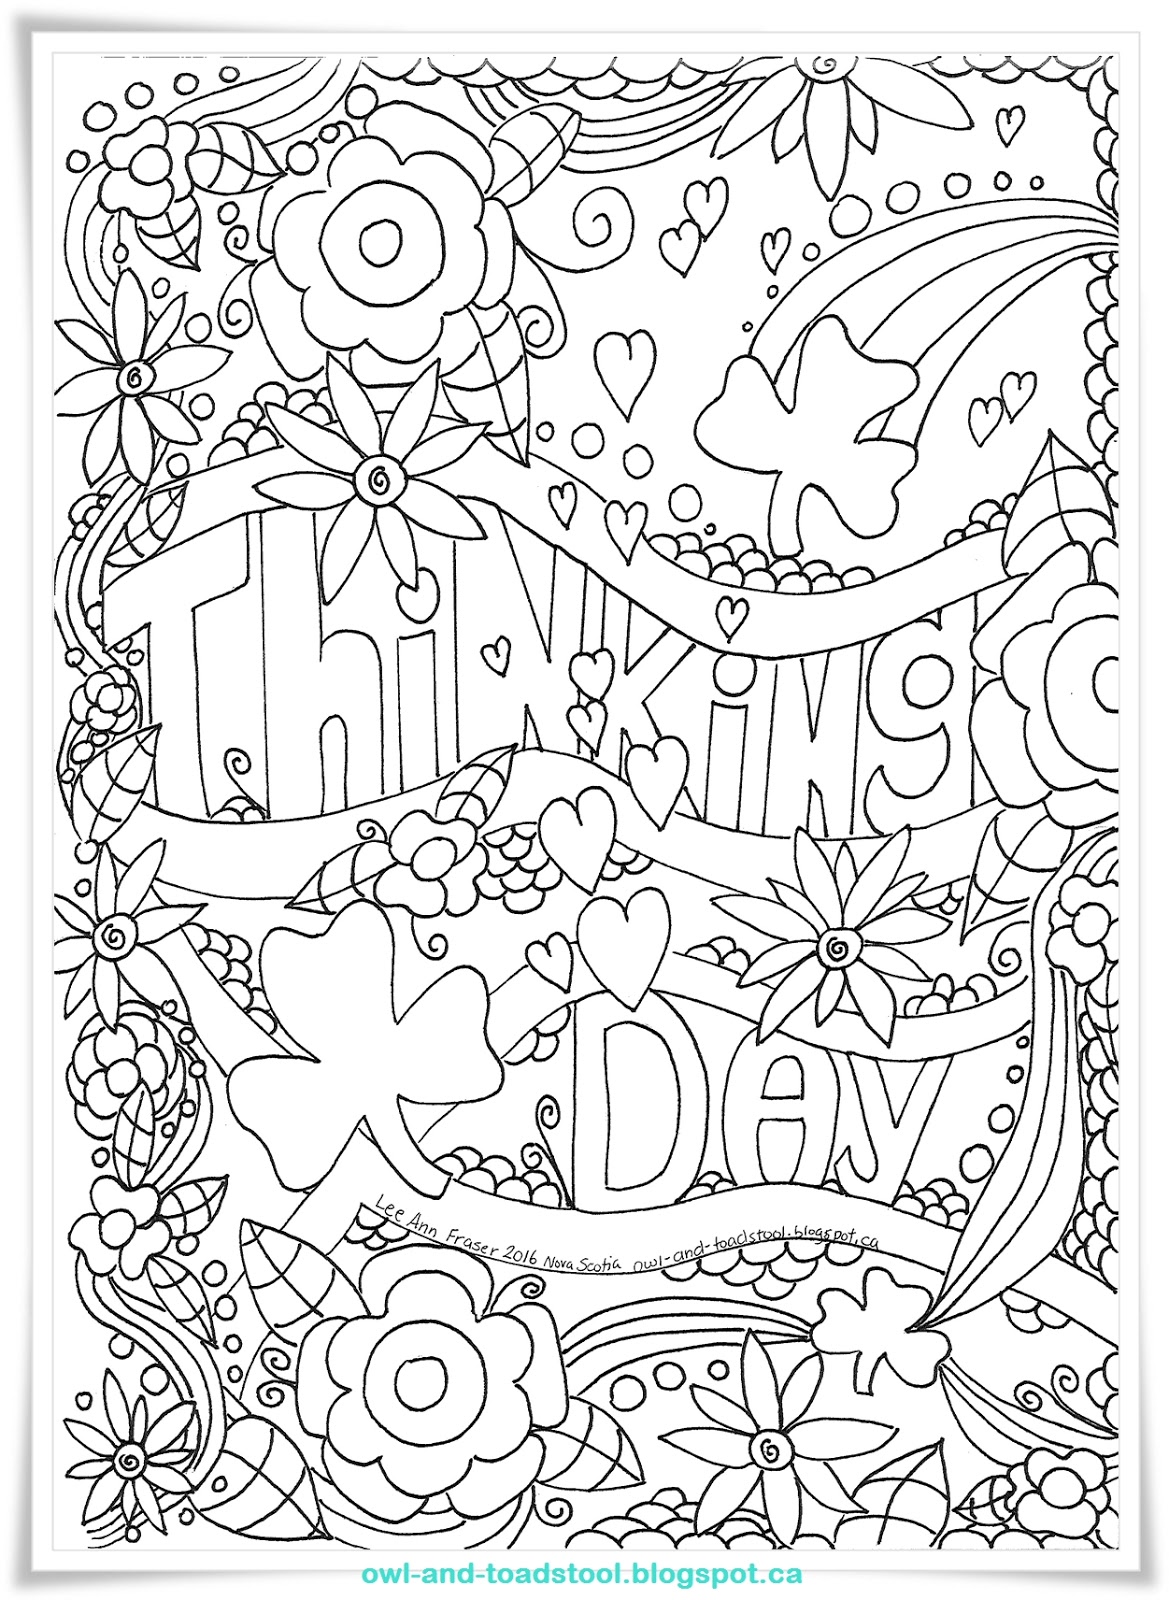 Thinking Of You Coloring Cards Pages Sketch Coloring Page